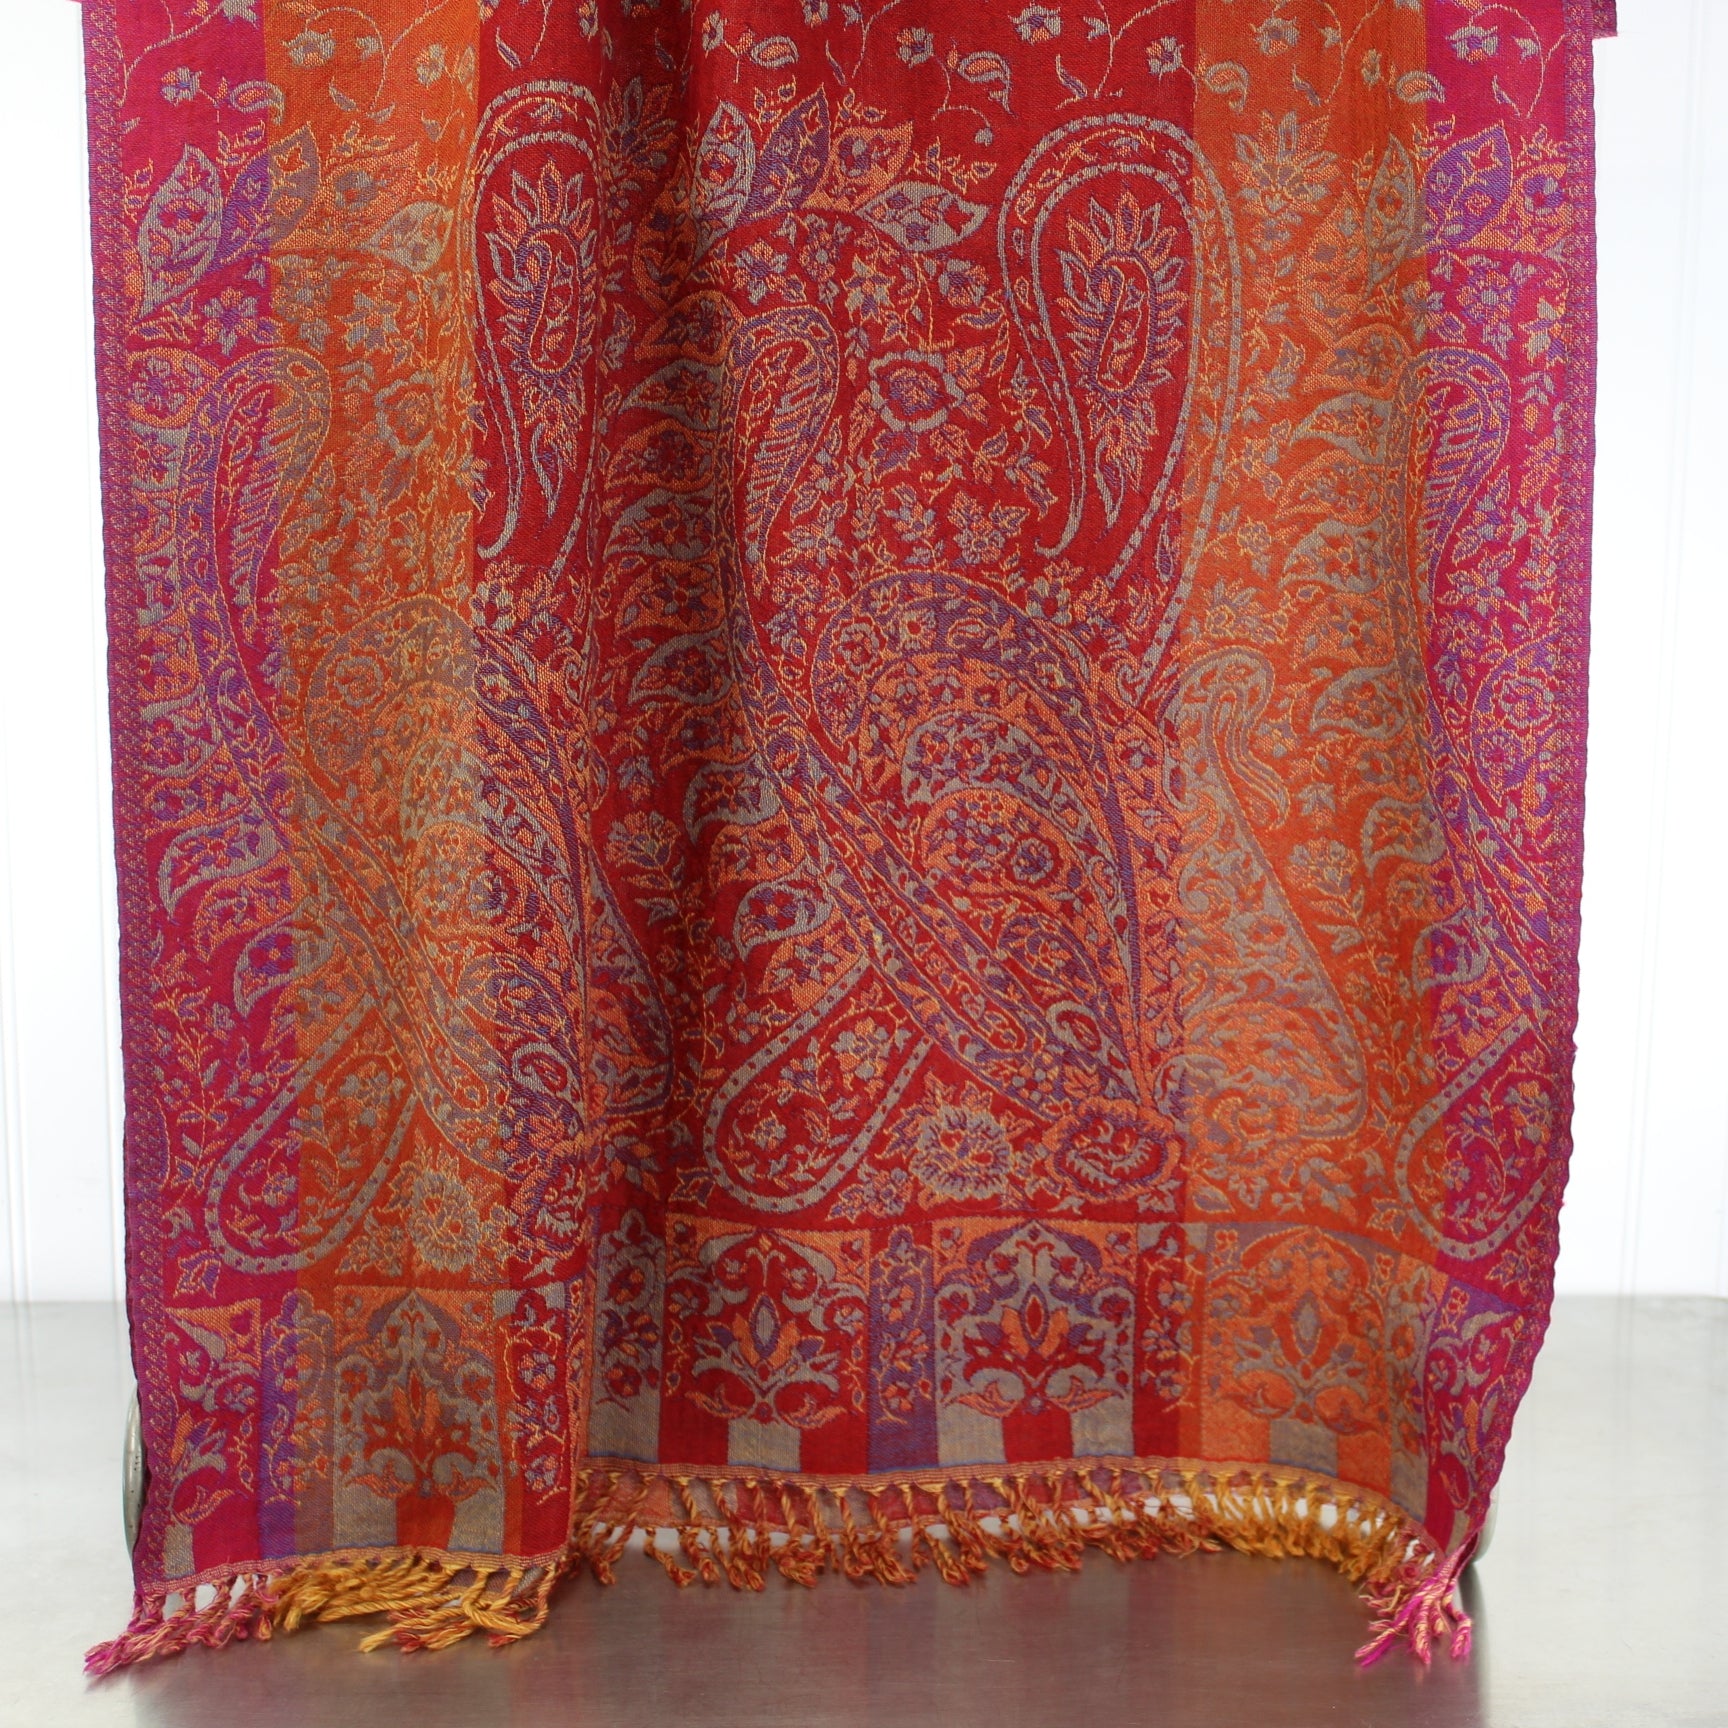 Pashmina Style Shawl Scarf Gorgeous Shades Red Coral Purple 40" X 27" Estate paisley floral patterns